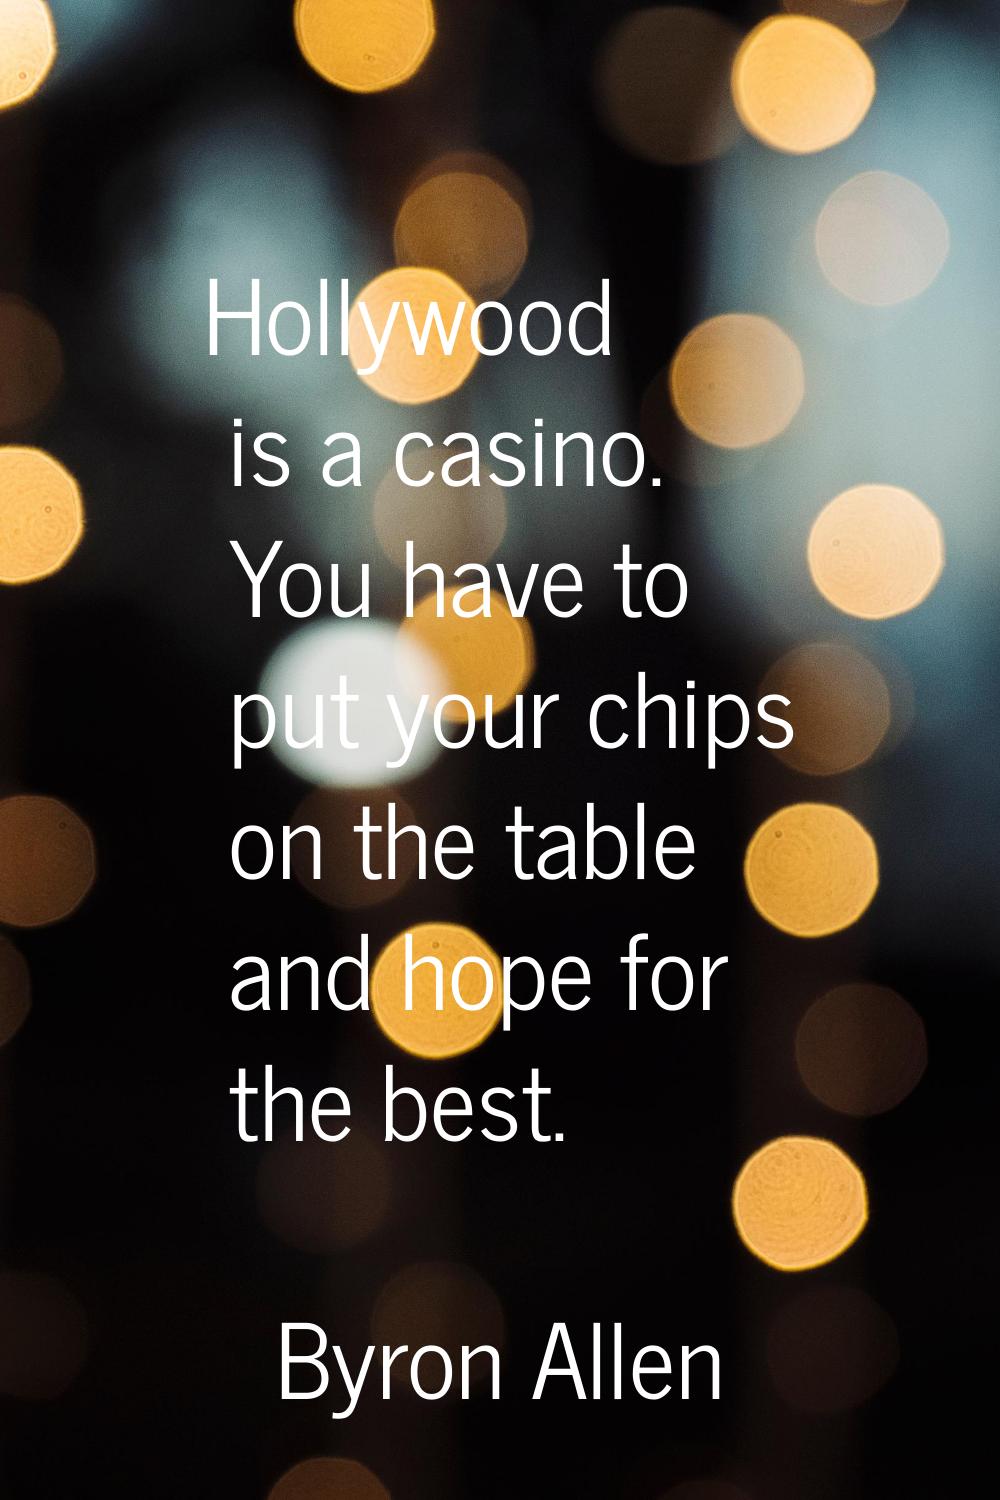 Hollywood is a casino. You have to put your chips on the table and hope for the best.